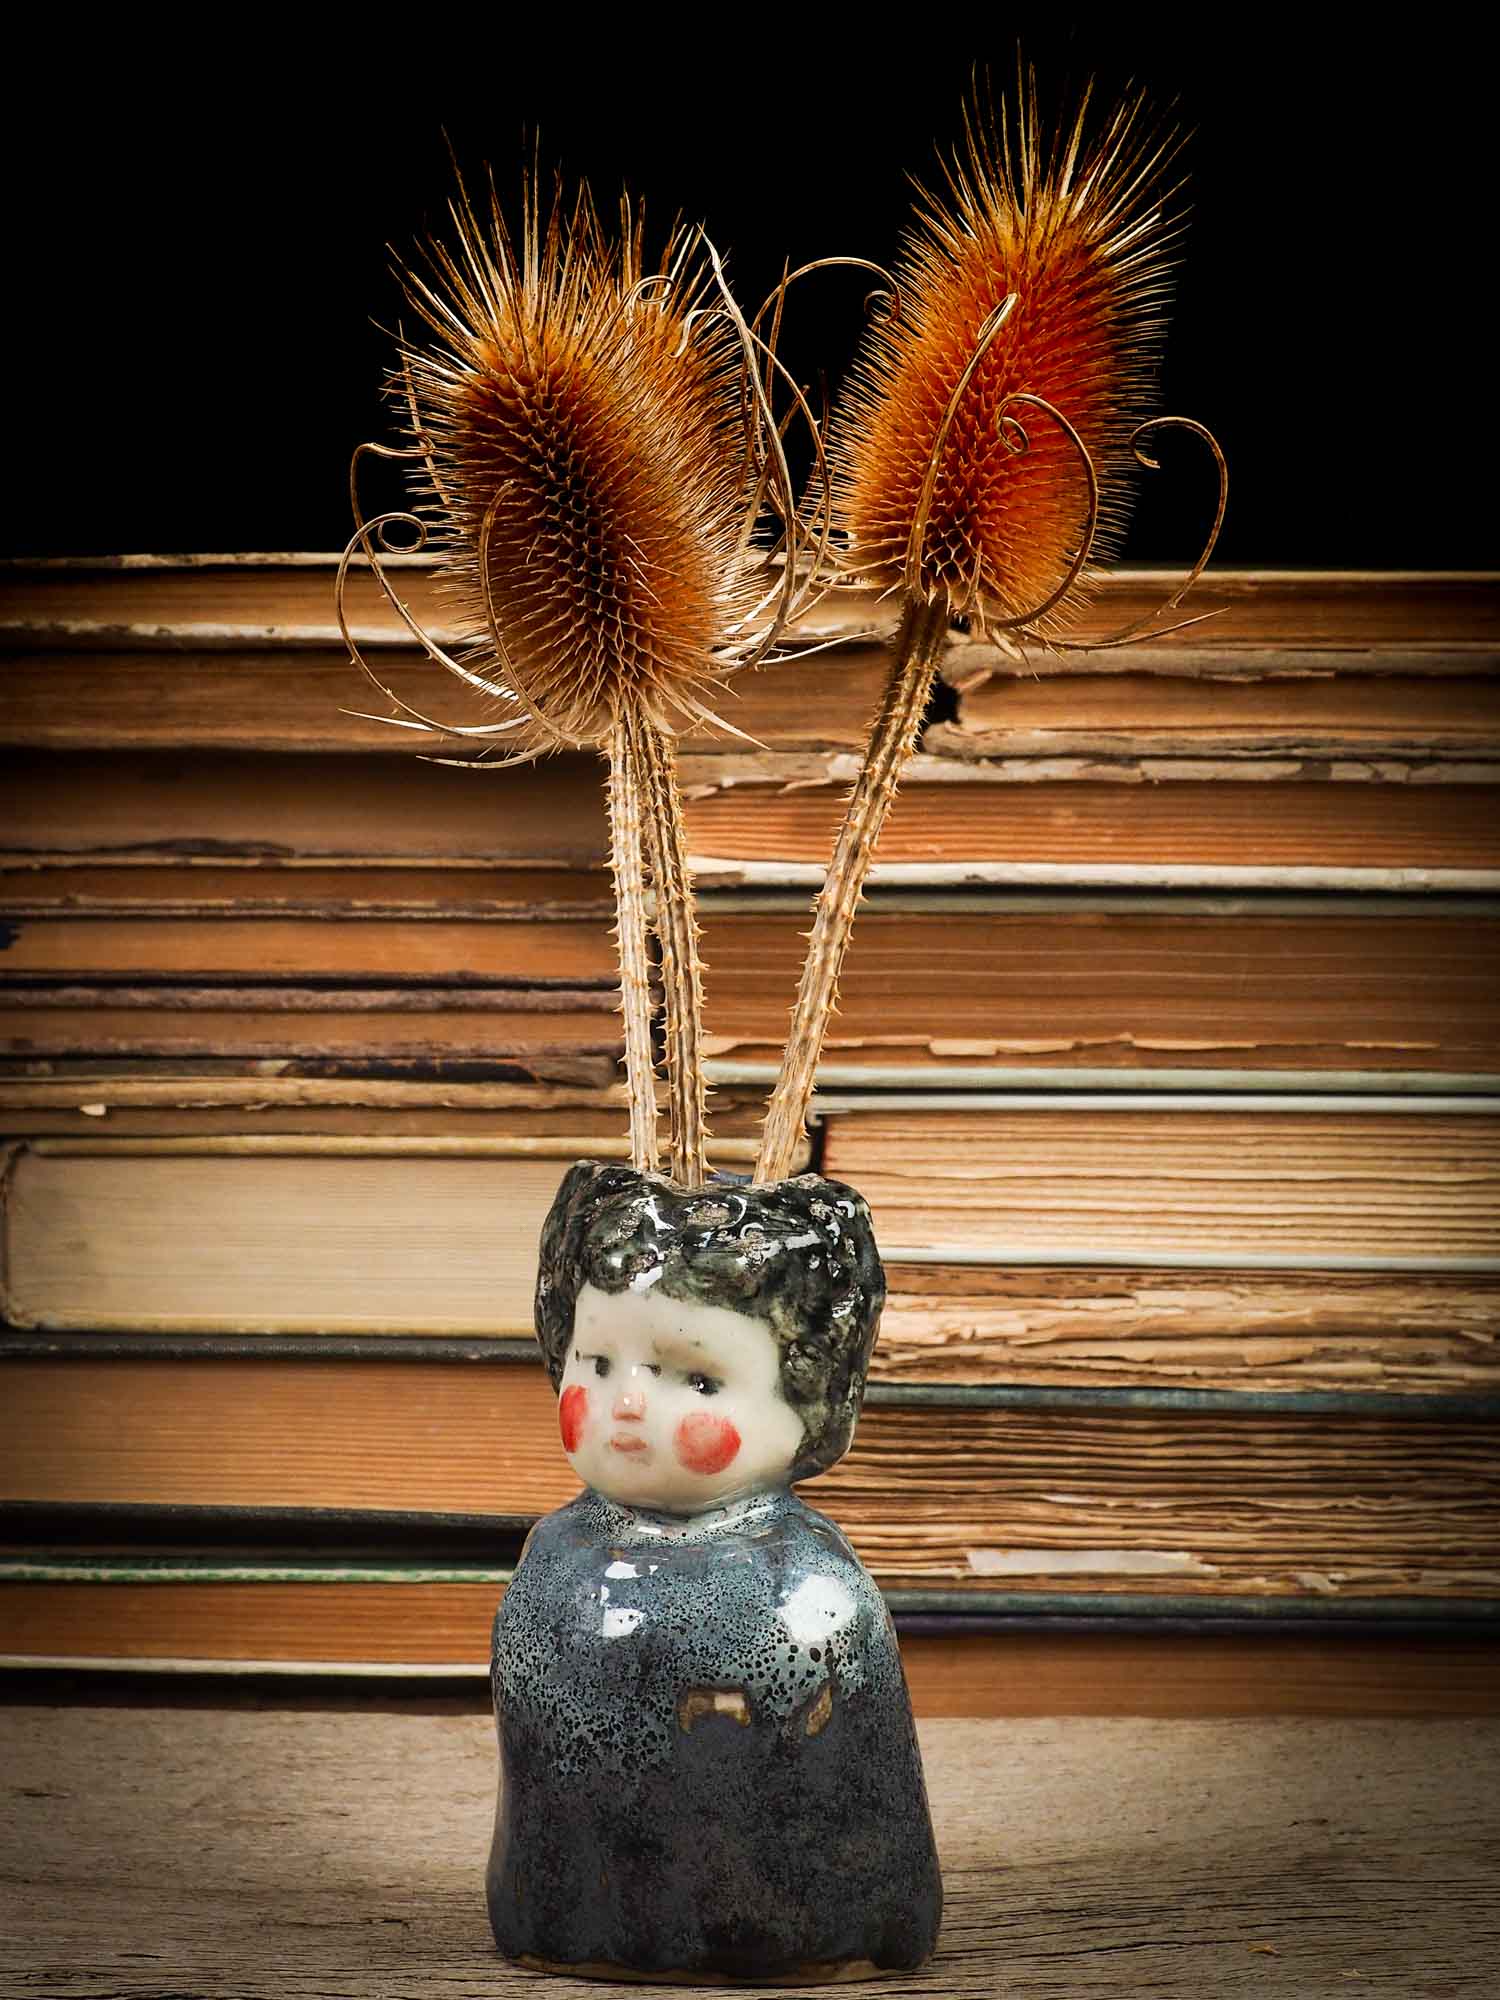 Original handmade ceramic artist brush and pencil holder by Idania Salcido, Danita Art. A unique ceramic artwork designed and hand built Idania Salcido. A beautiful handmade touch to any artist's studio with handmade glazed ceramic good for watercolors acrylics inks and oil paints. Clean with water or mineral spirits.